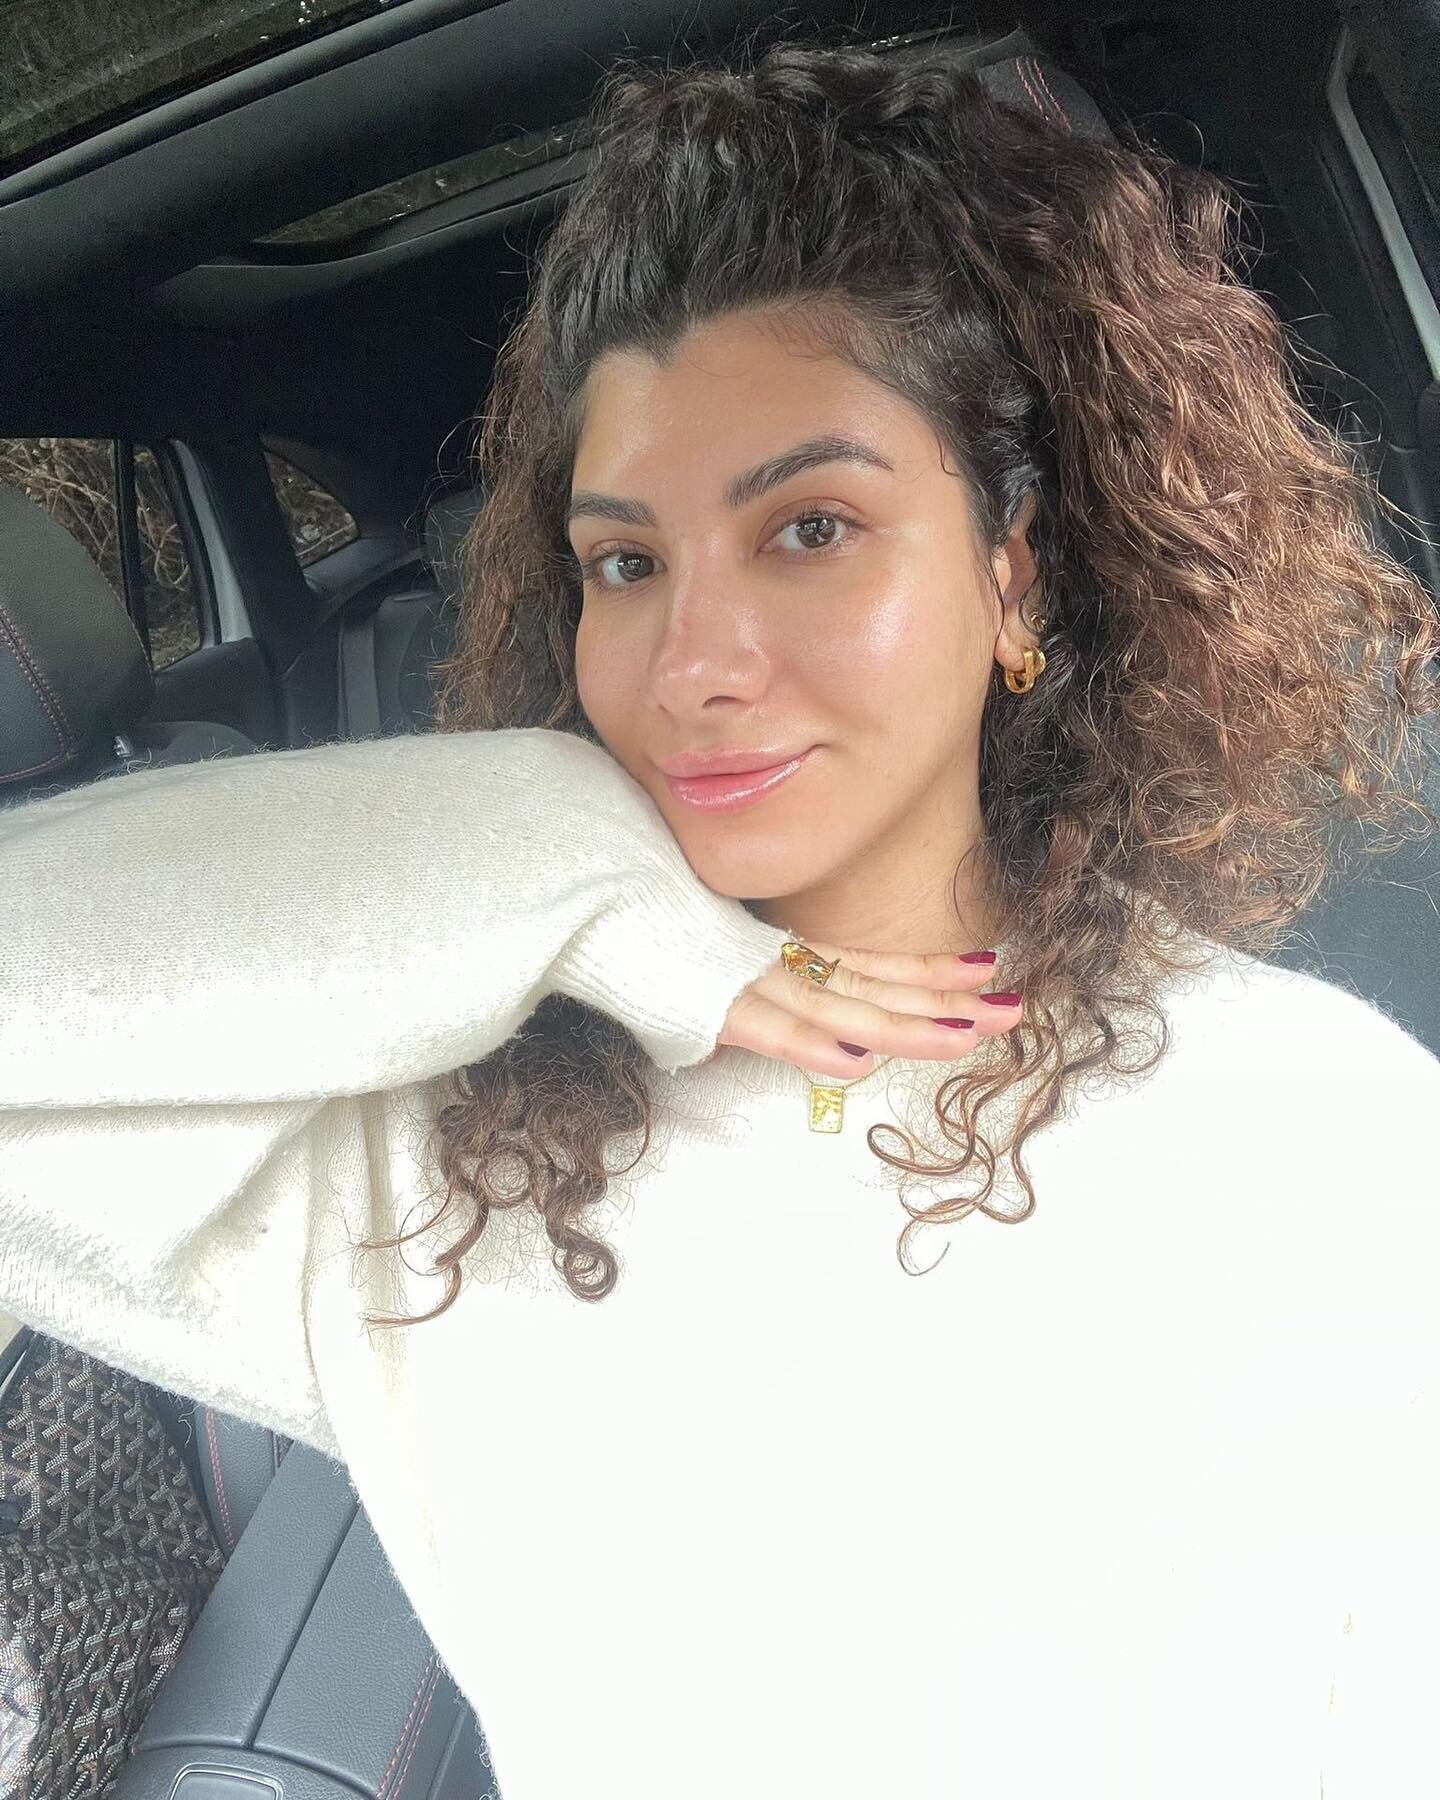 ✨ Glowing post-Metabolic Peel! ✨ Check out this stunning results from my beautiful client. 😍 

Experience a slight dryness initially, but in just 6/7 days, your skin will shine with even tone, defined pores, and a healthier glow 💛 

You have two op